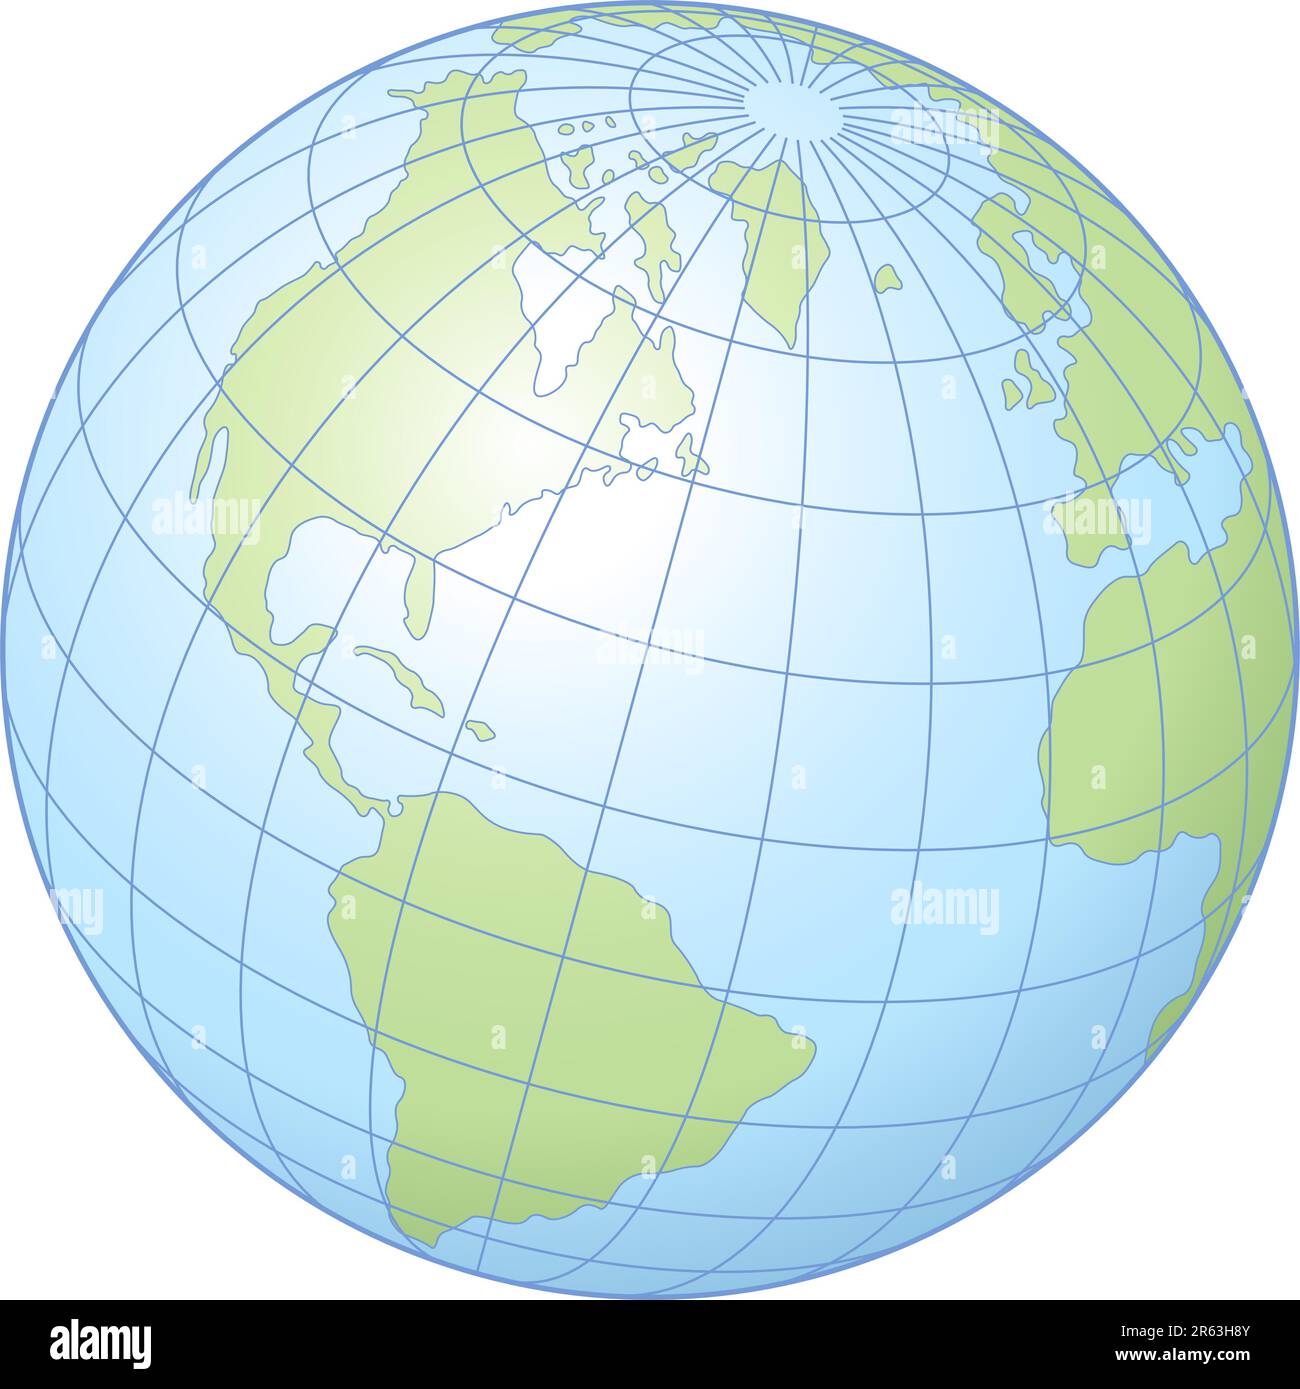 Simple vector illustration of the globe showing latitude and longitude. Stock Vector